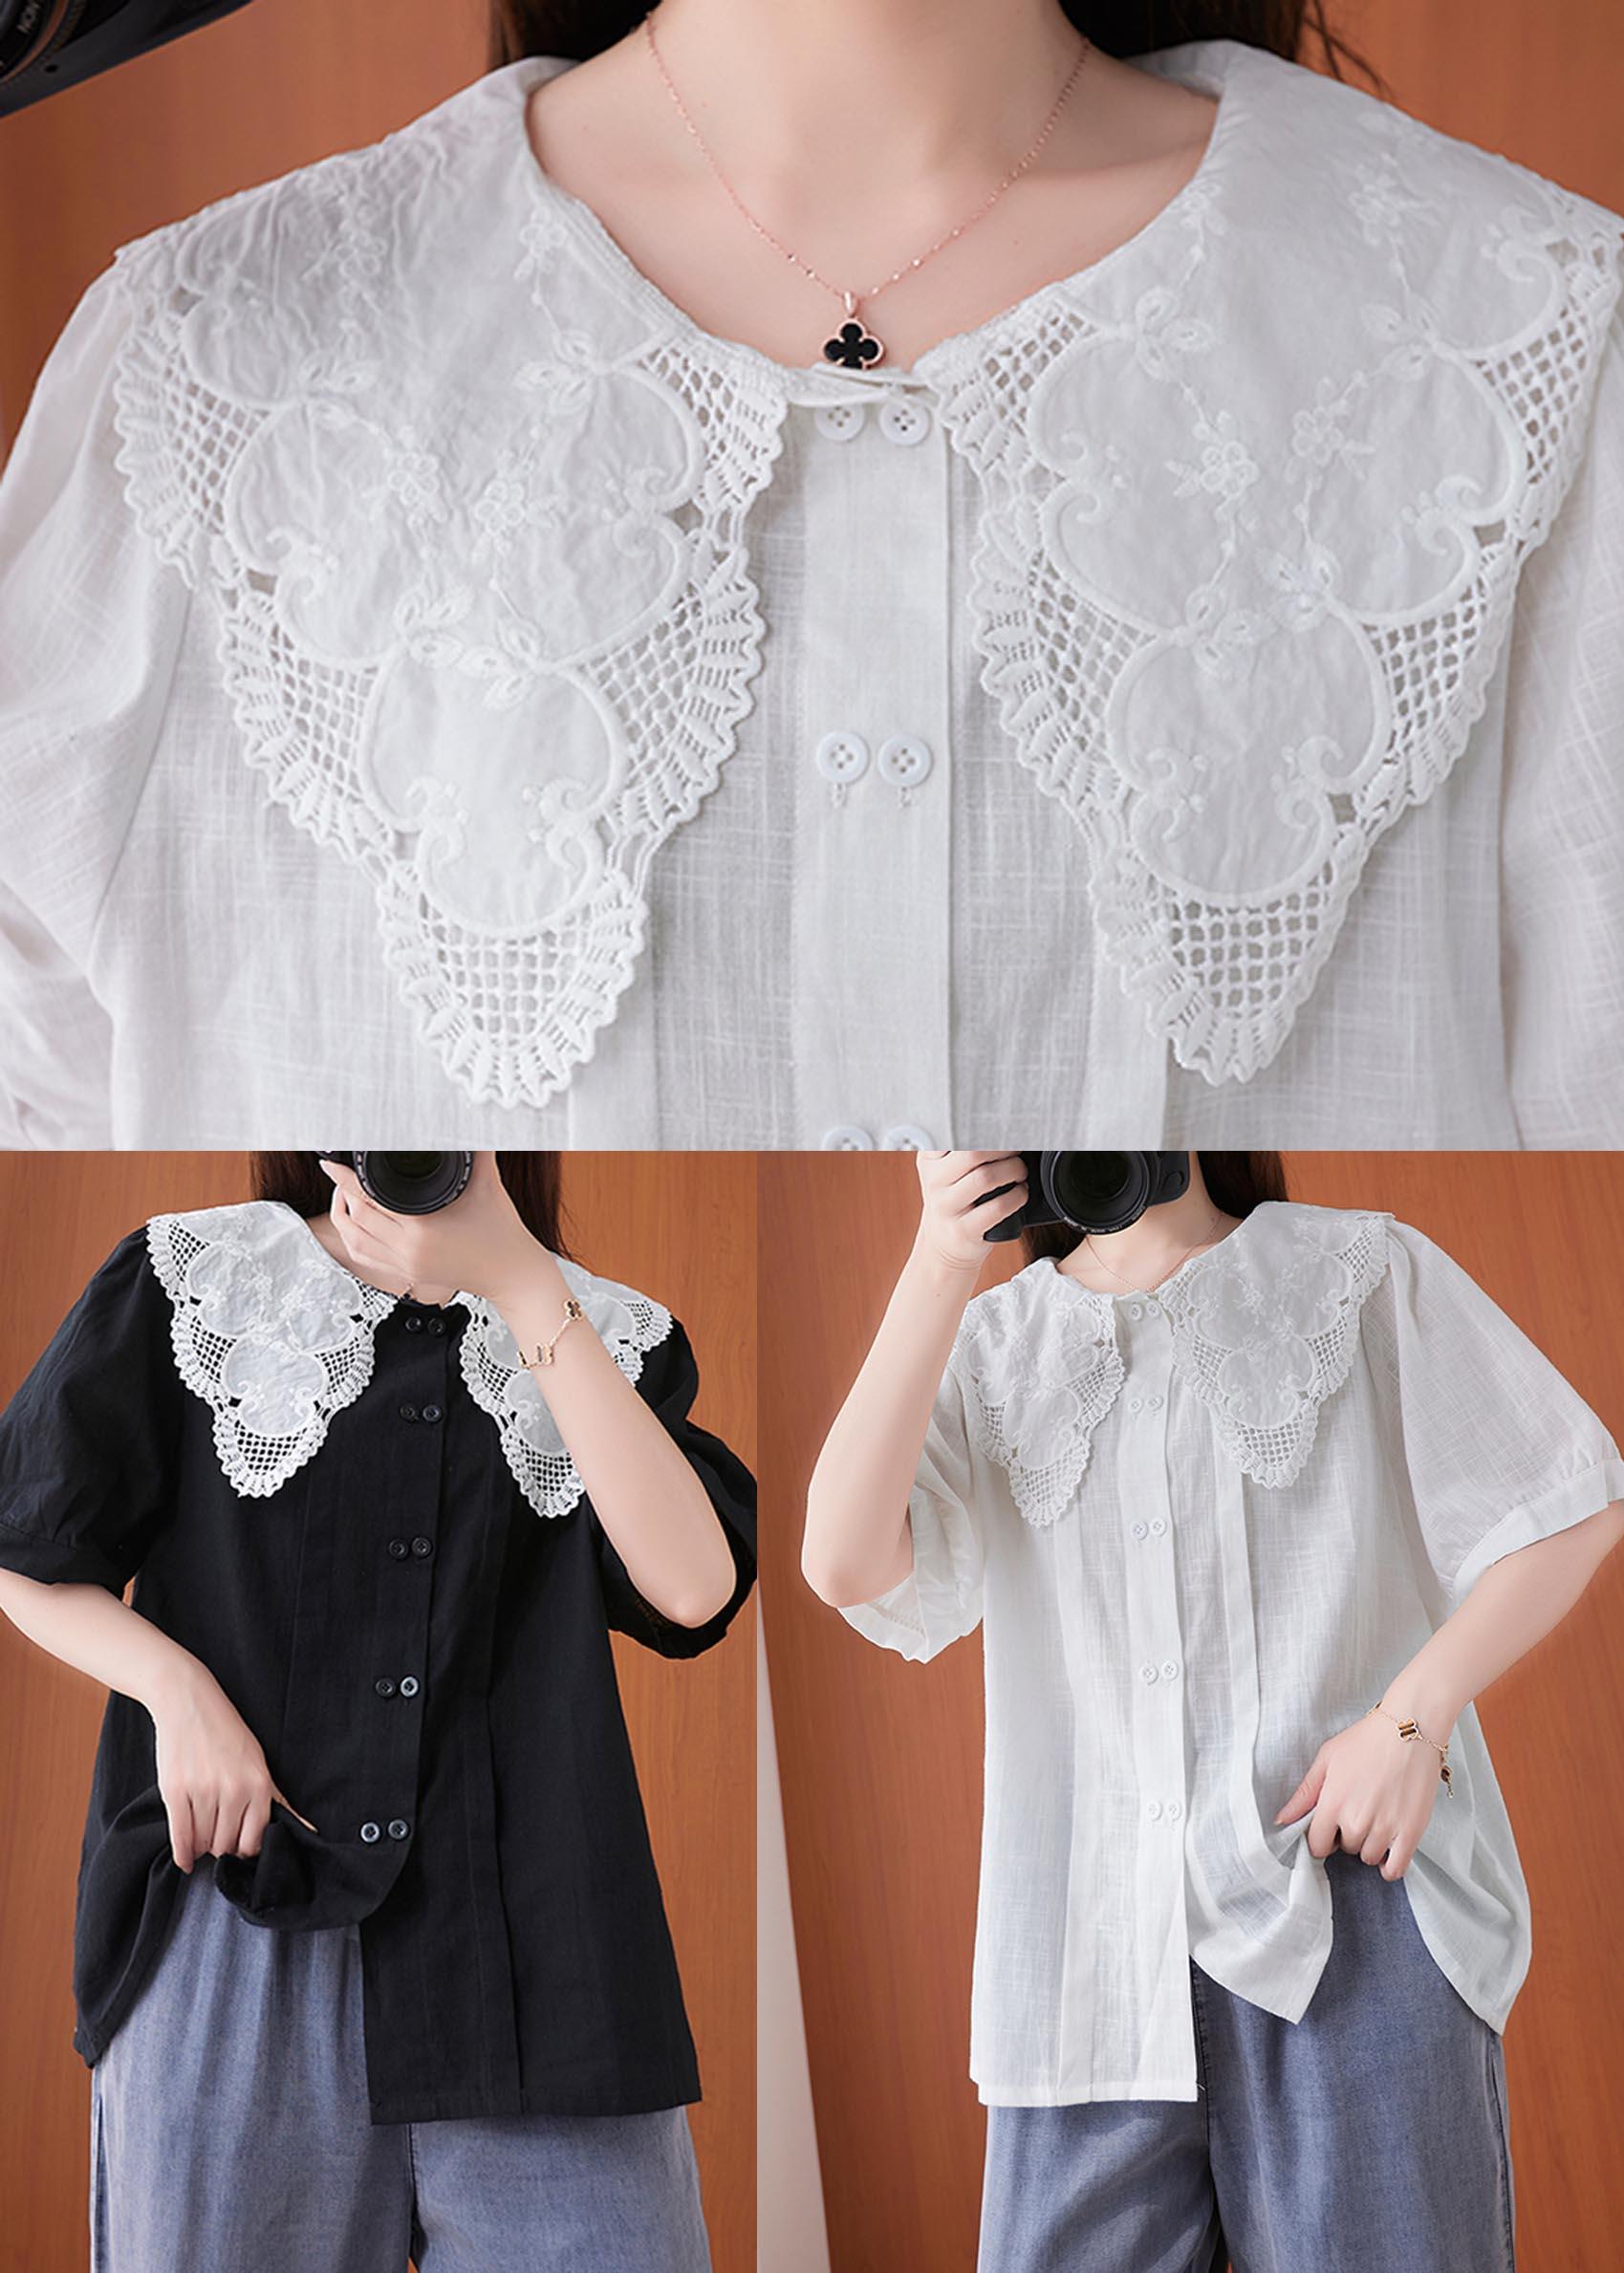 French Black Patchwork Lace Cotton Linen Shirt Top Summer - Omychic